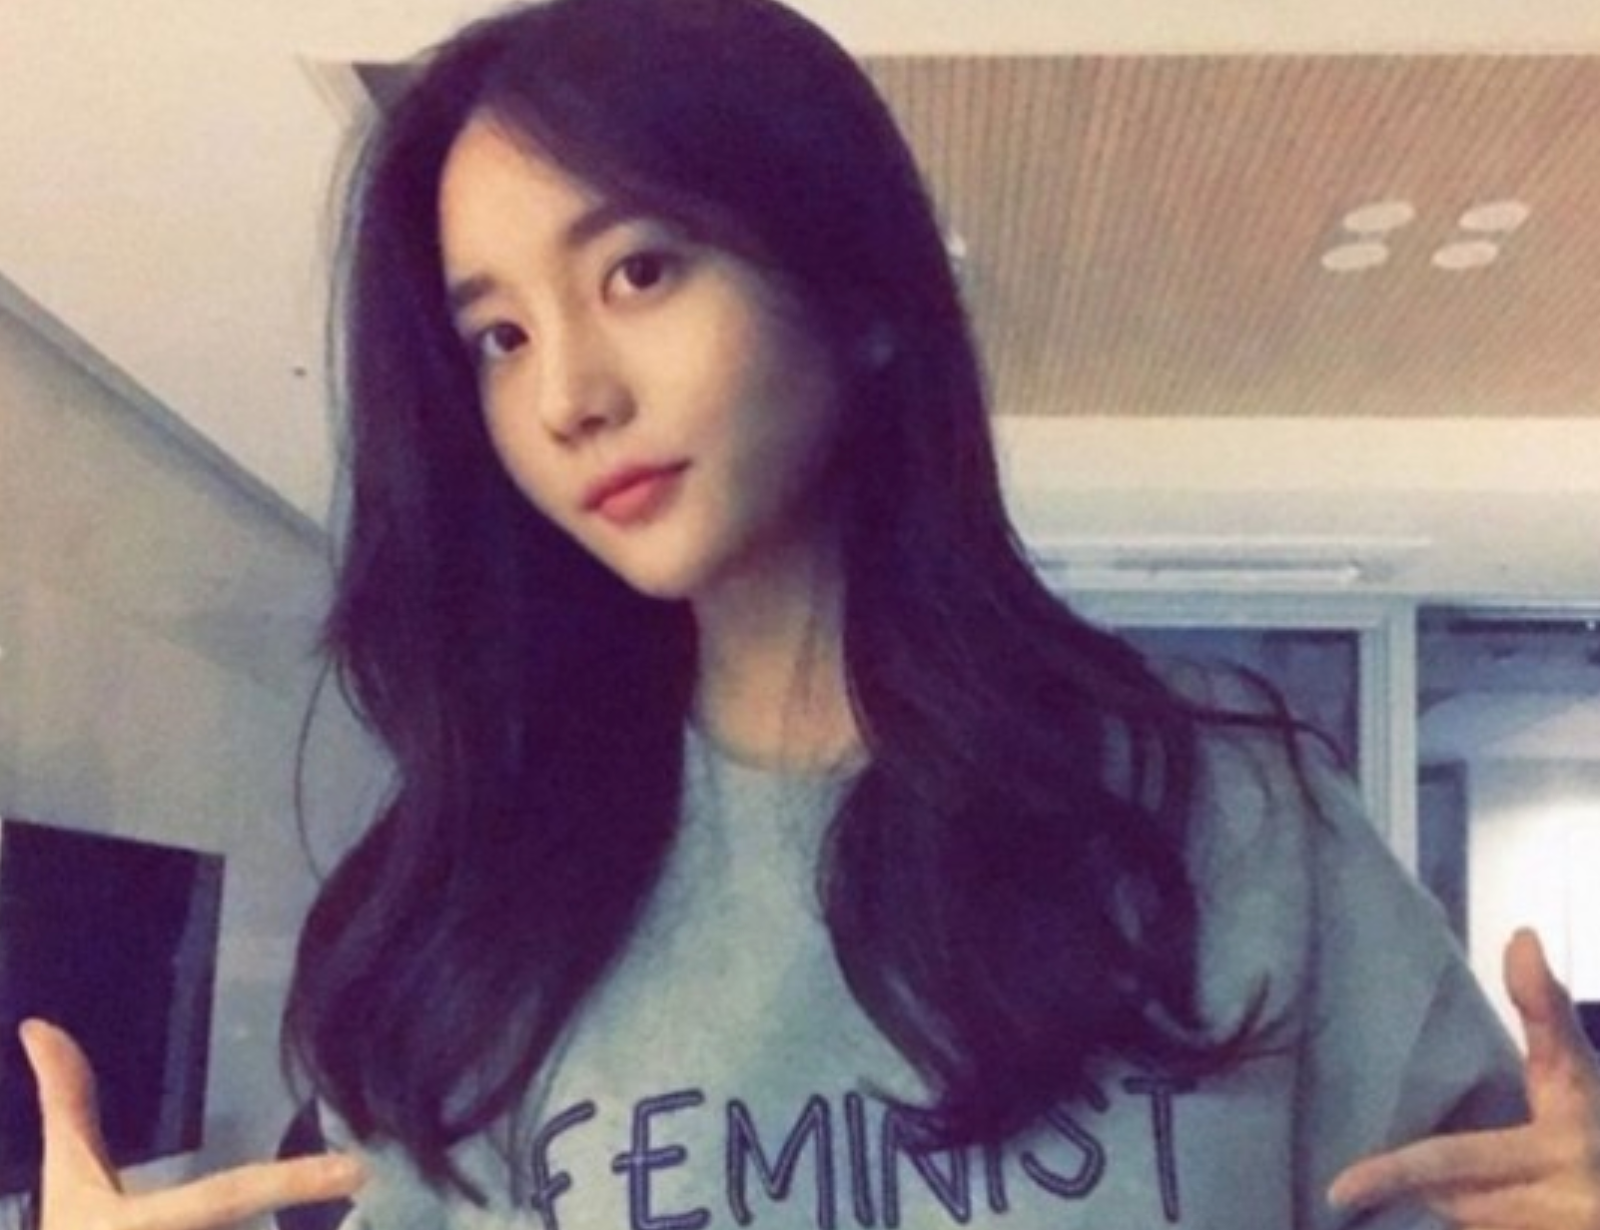 [BREAKING] Han Seo Hee revealed to have violated her probation after